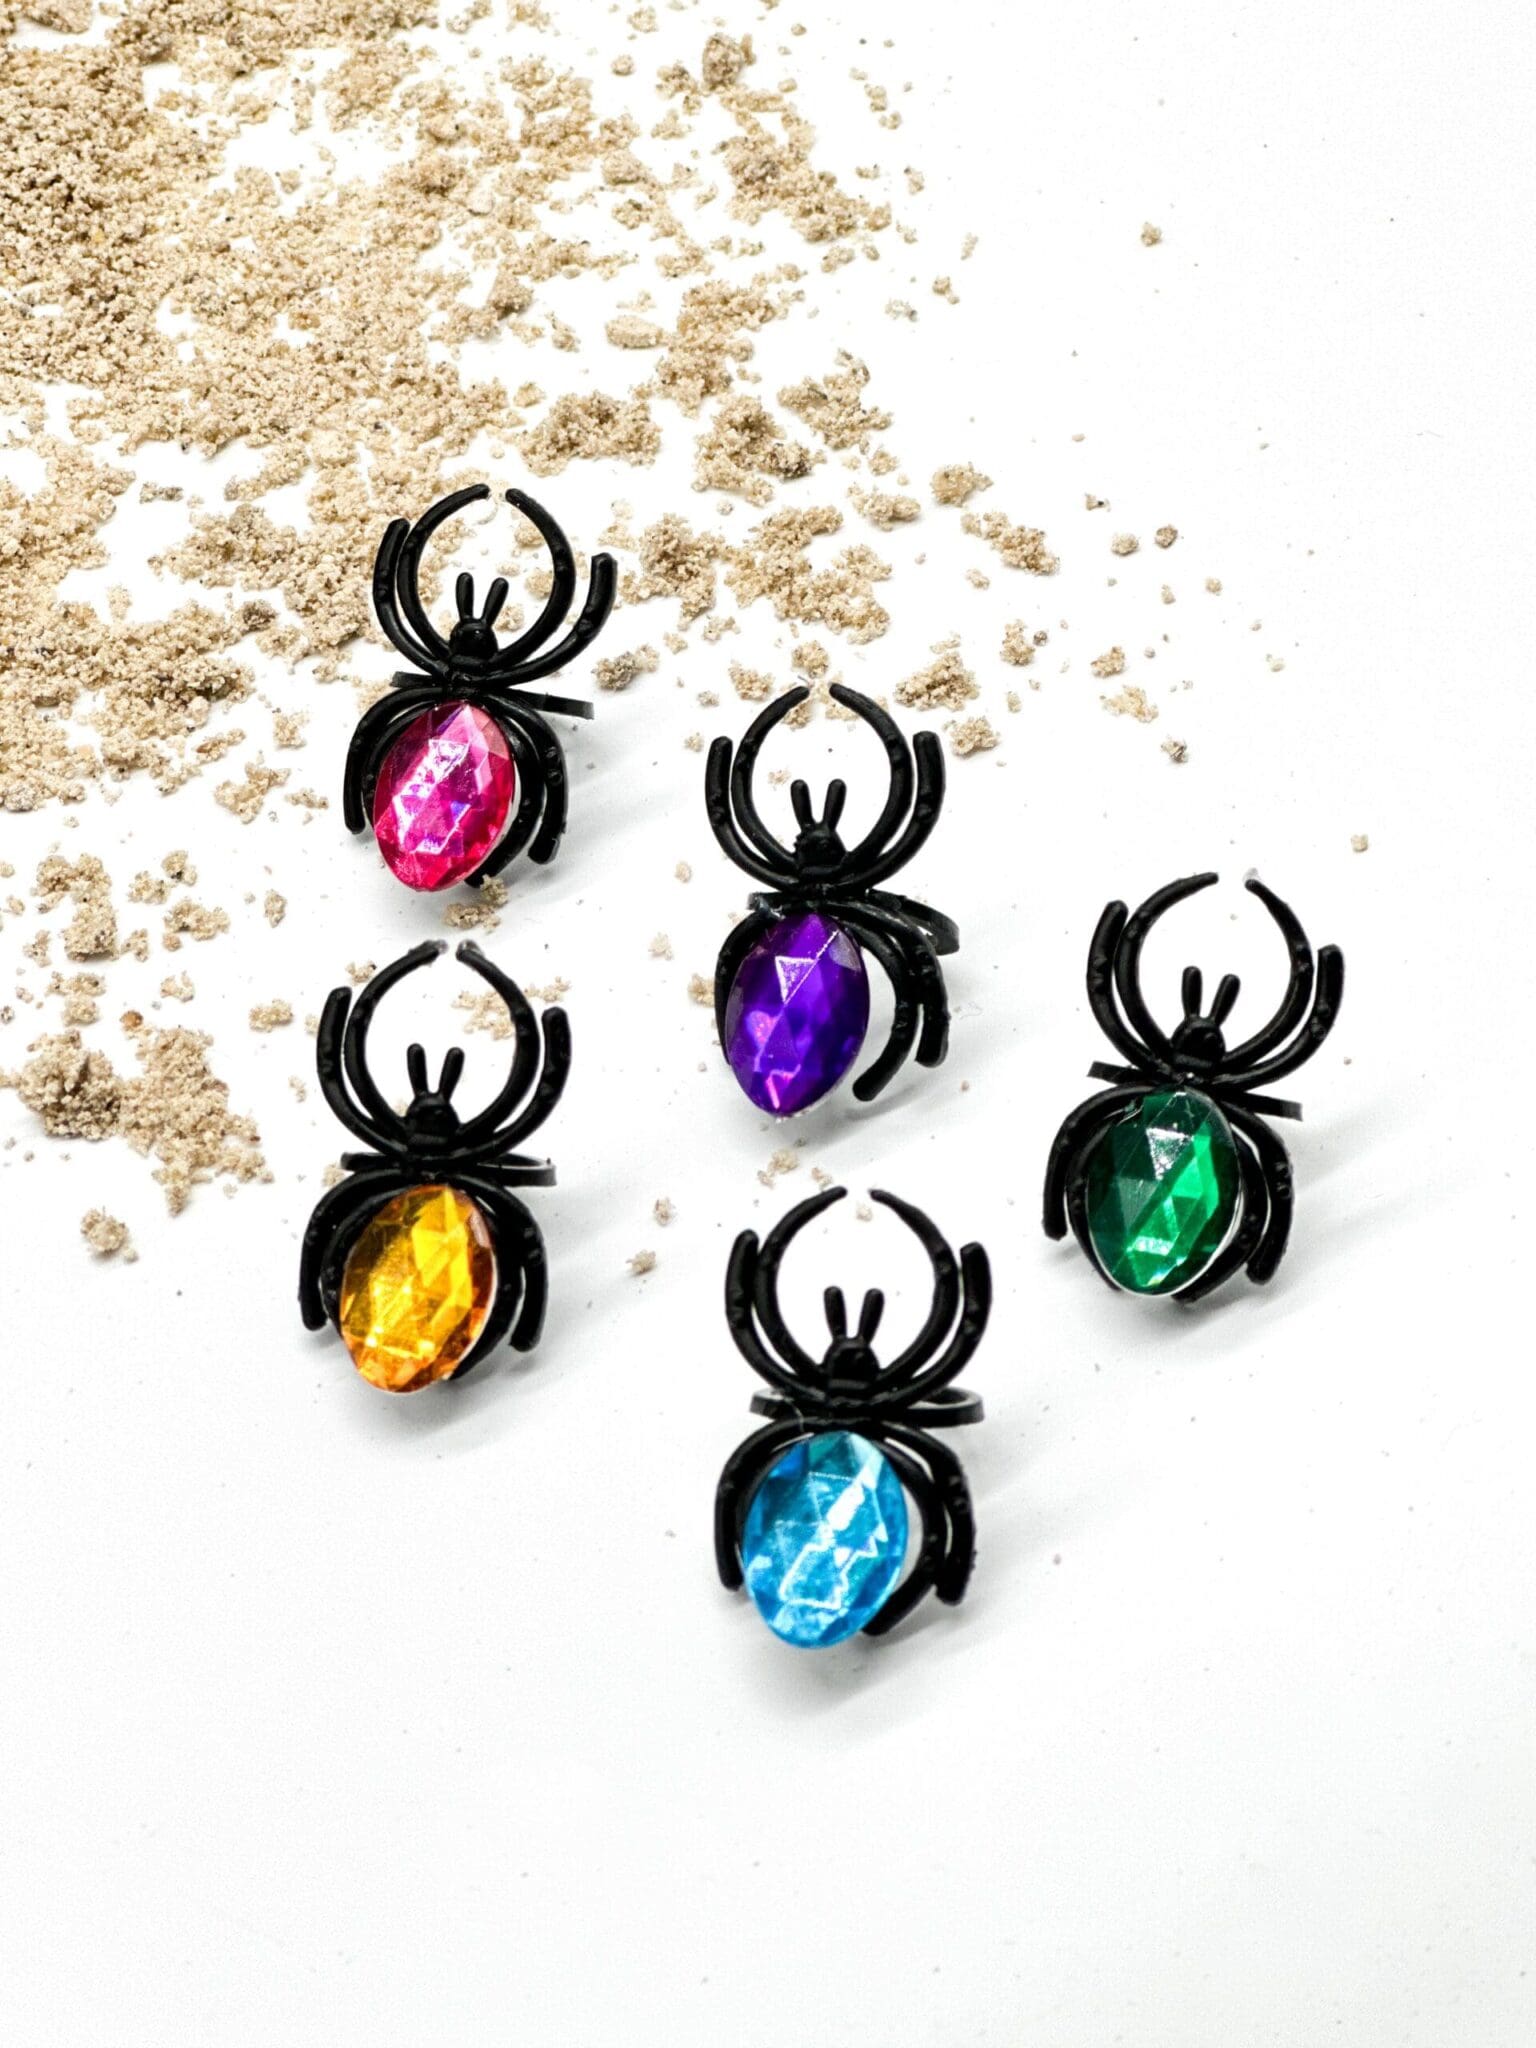 Spider Rings with Acrylic Jewel